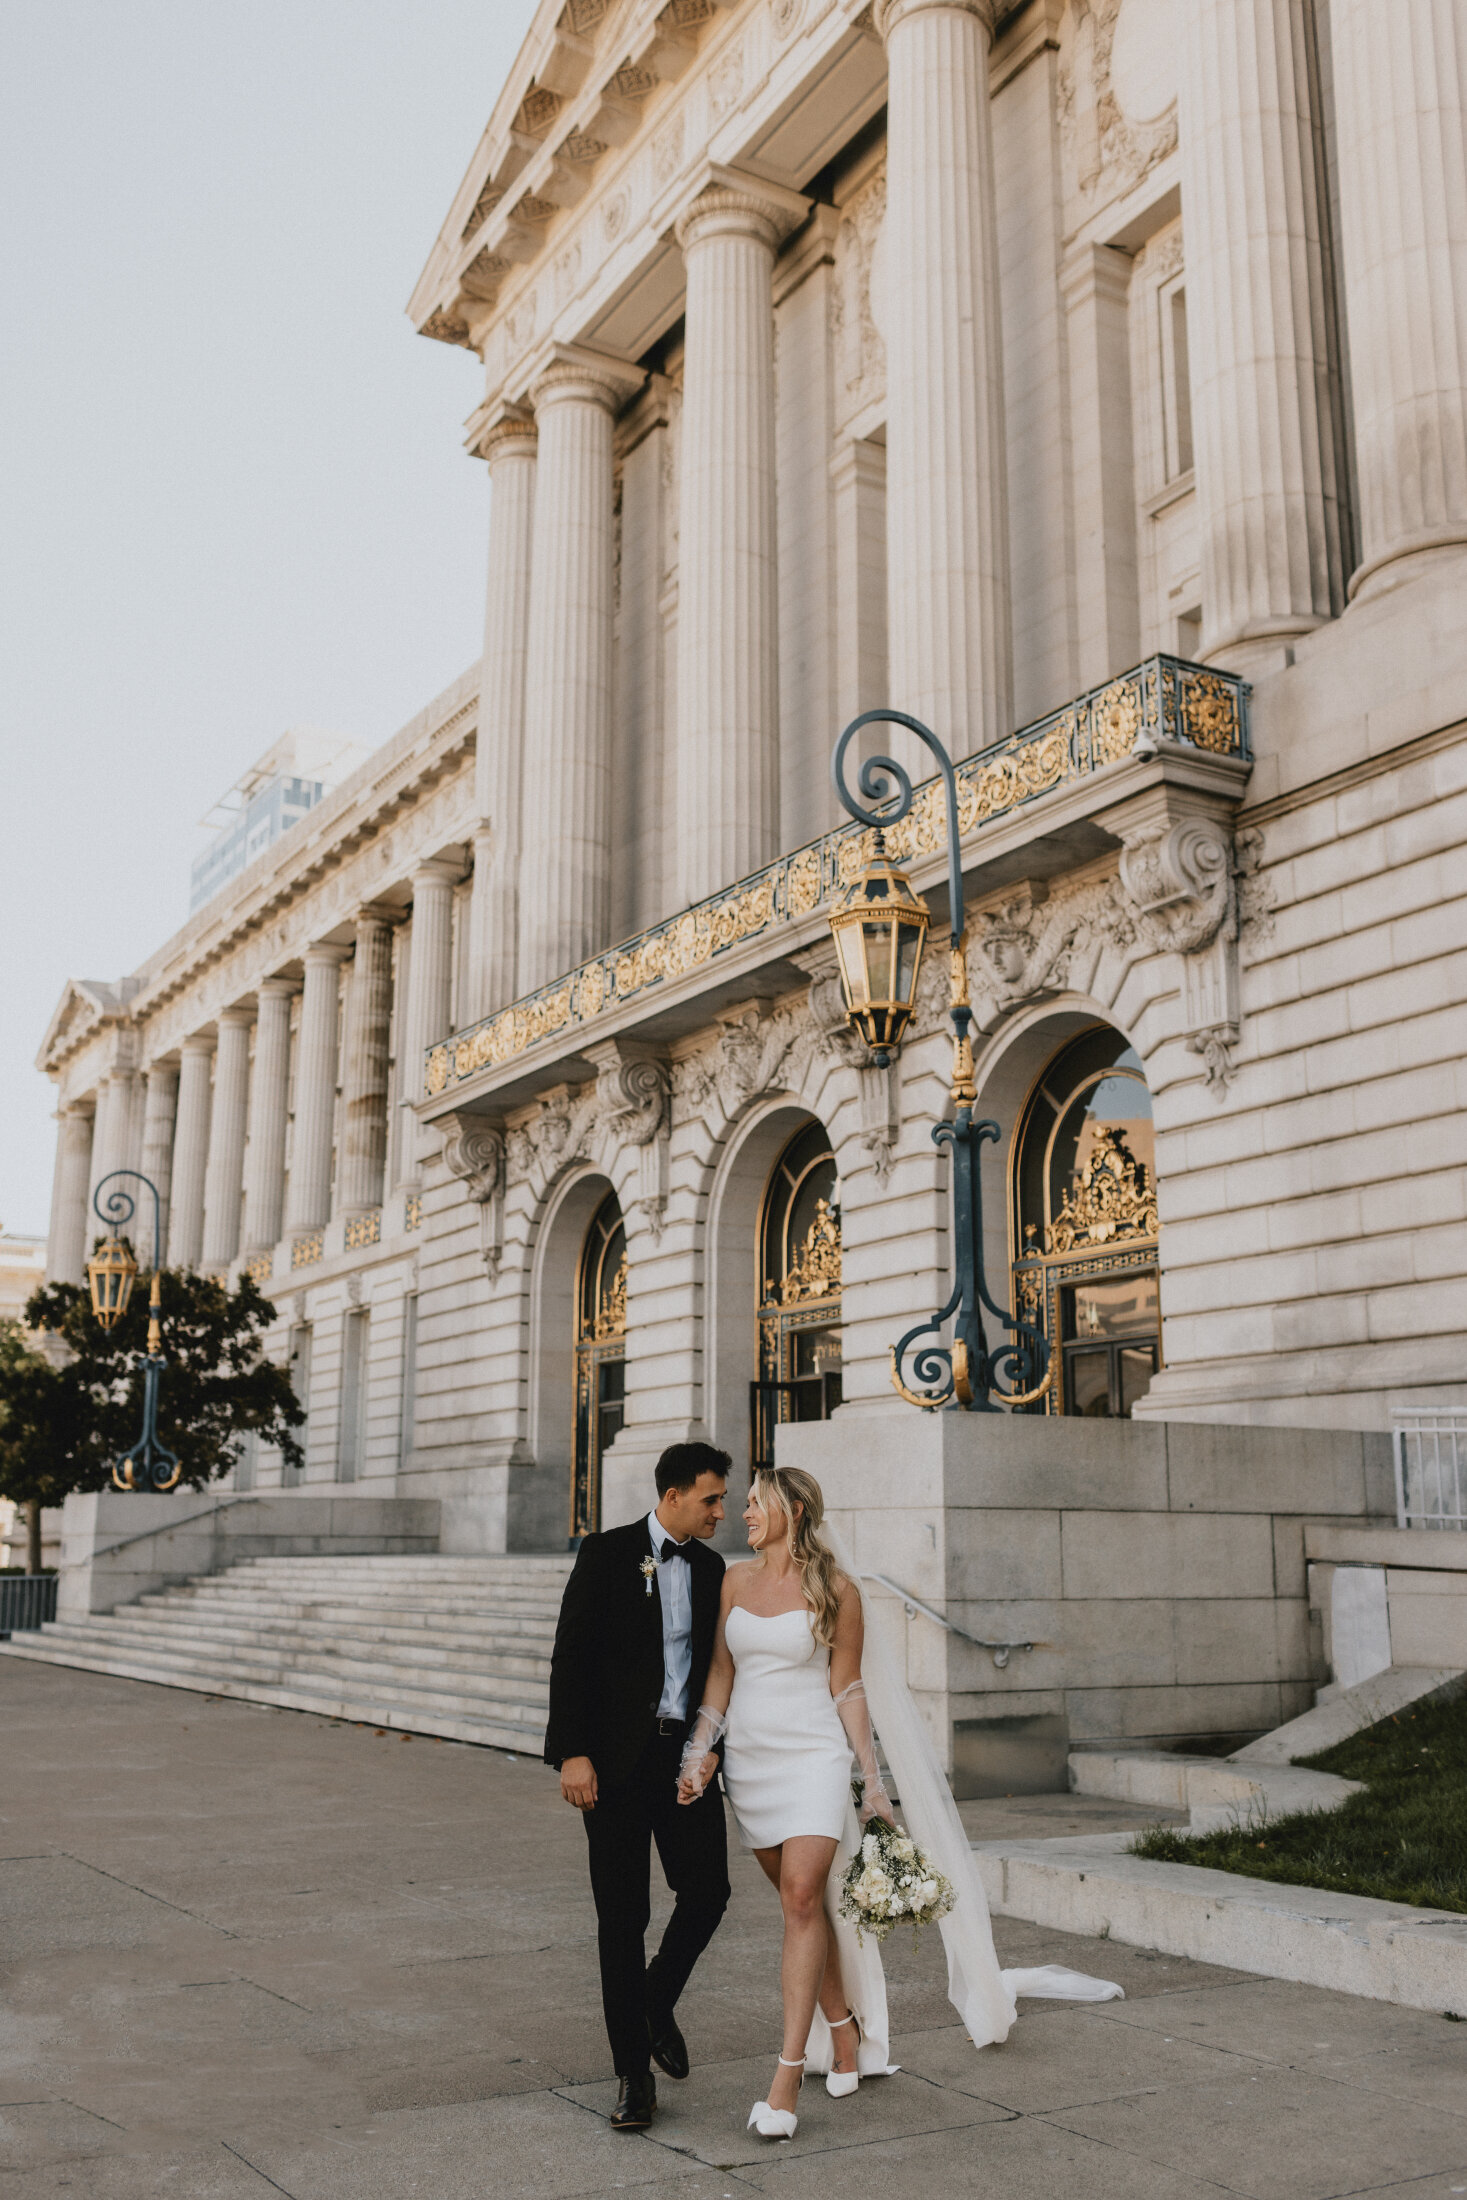 A newly married couple walks hand in hand outside an ornate City Hall building with classical columns and decorative street lamps in San Francisco, the bride in a white dress holding a bouquet and the groom in a black suit